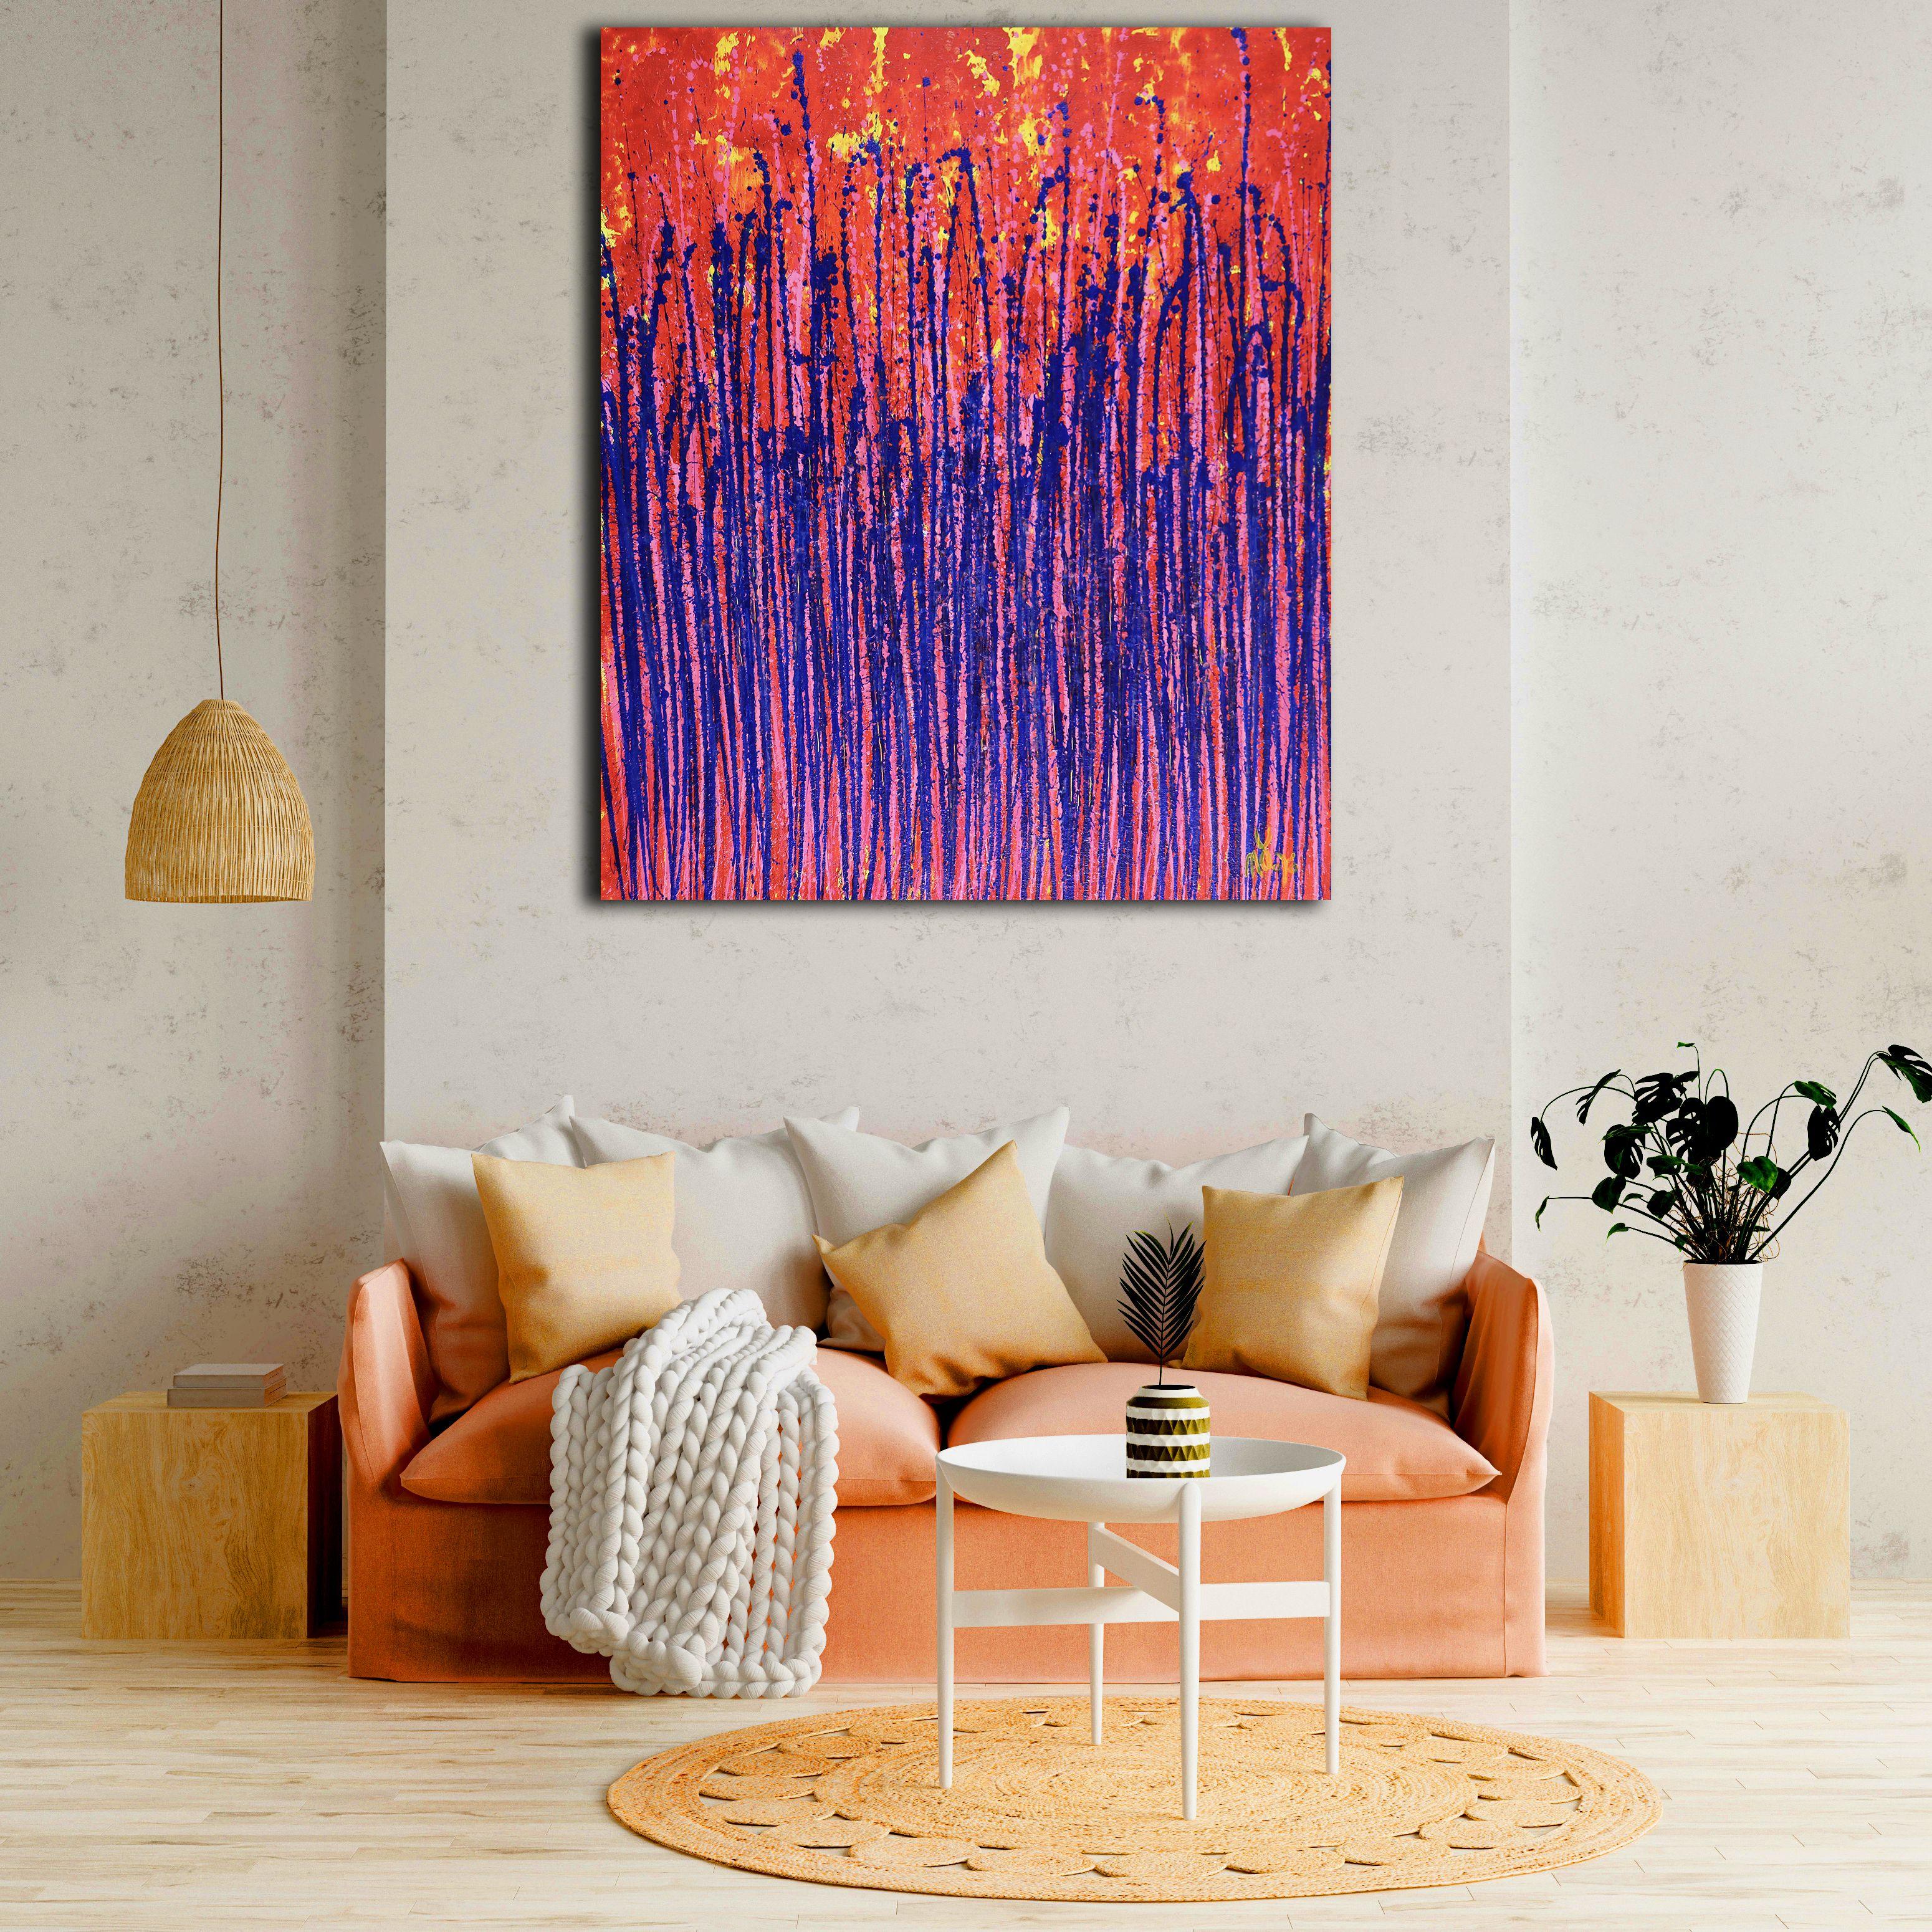 Vibrant abstract painting with many action drizzles in vibrant metallic blue, orange, green and iridescent clear gold paint, over vivid orange background. Signed in front.    I include a certificate of authenticity that lists the materials as well